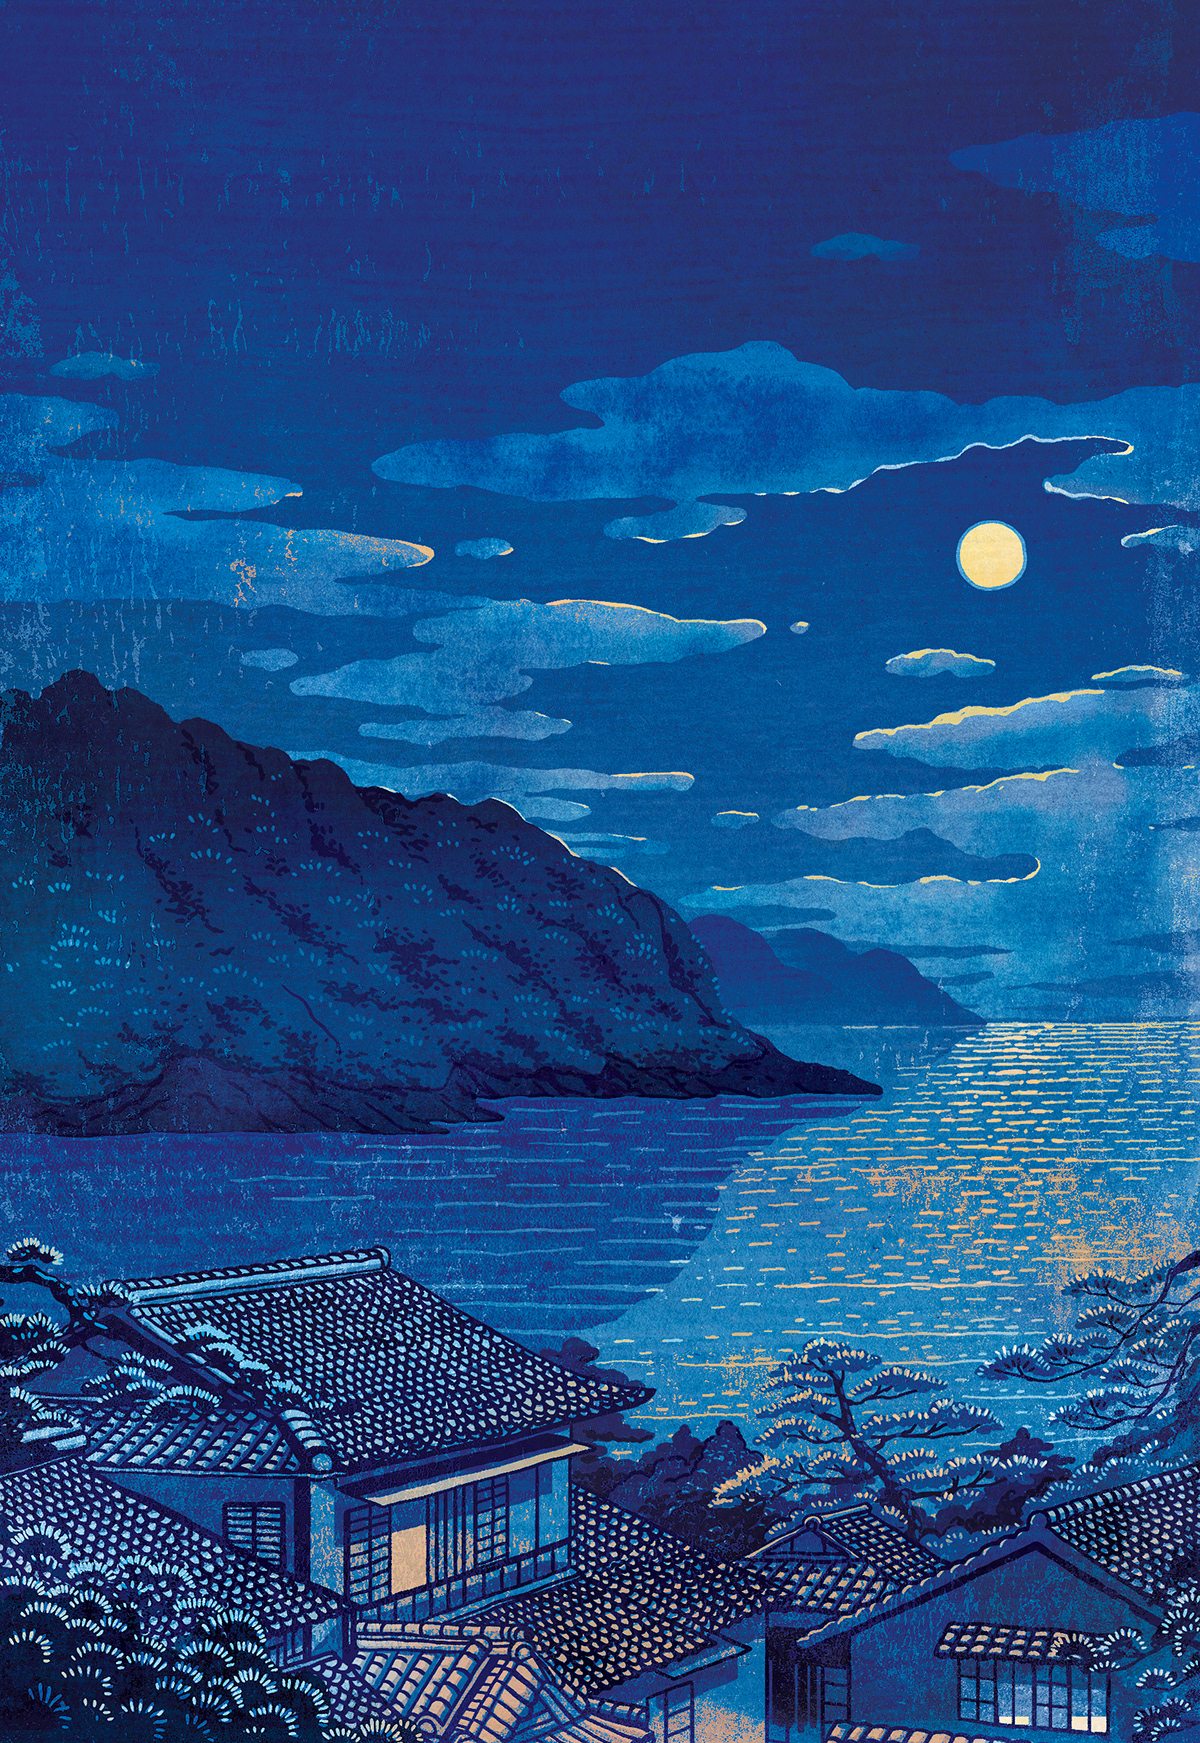 book book cover by the shore cover japanese illustration moon sea seashore waves